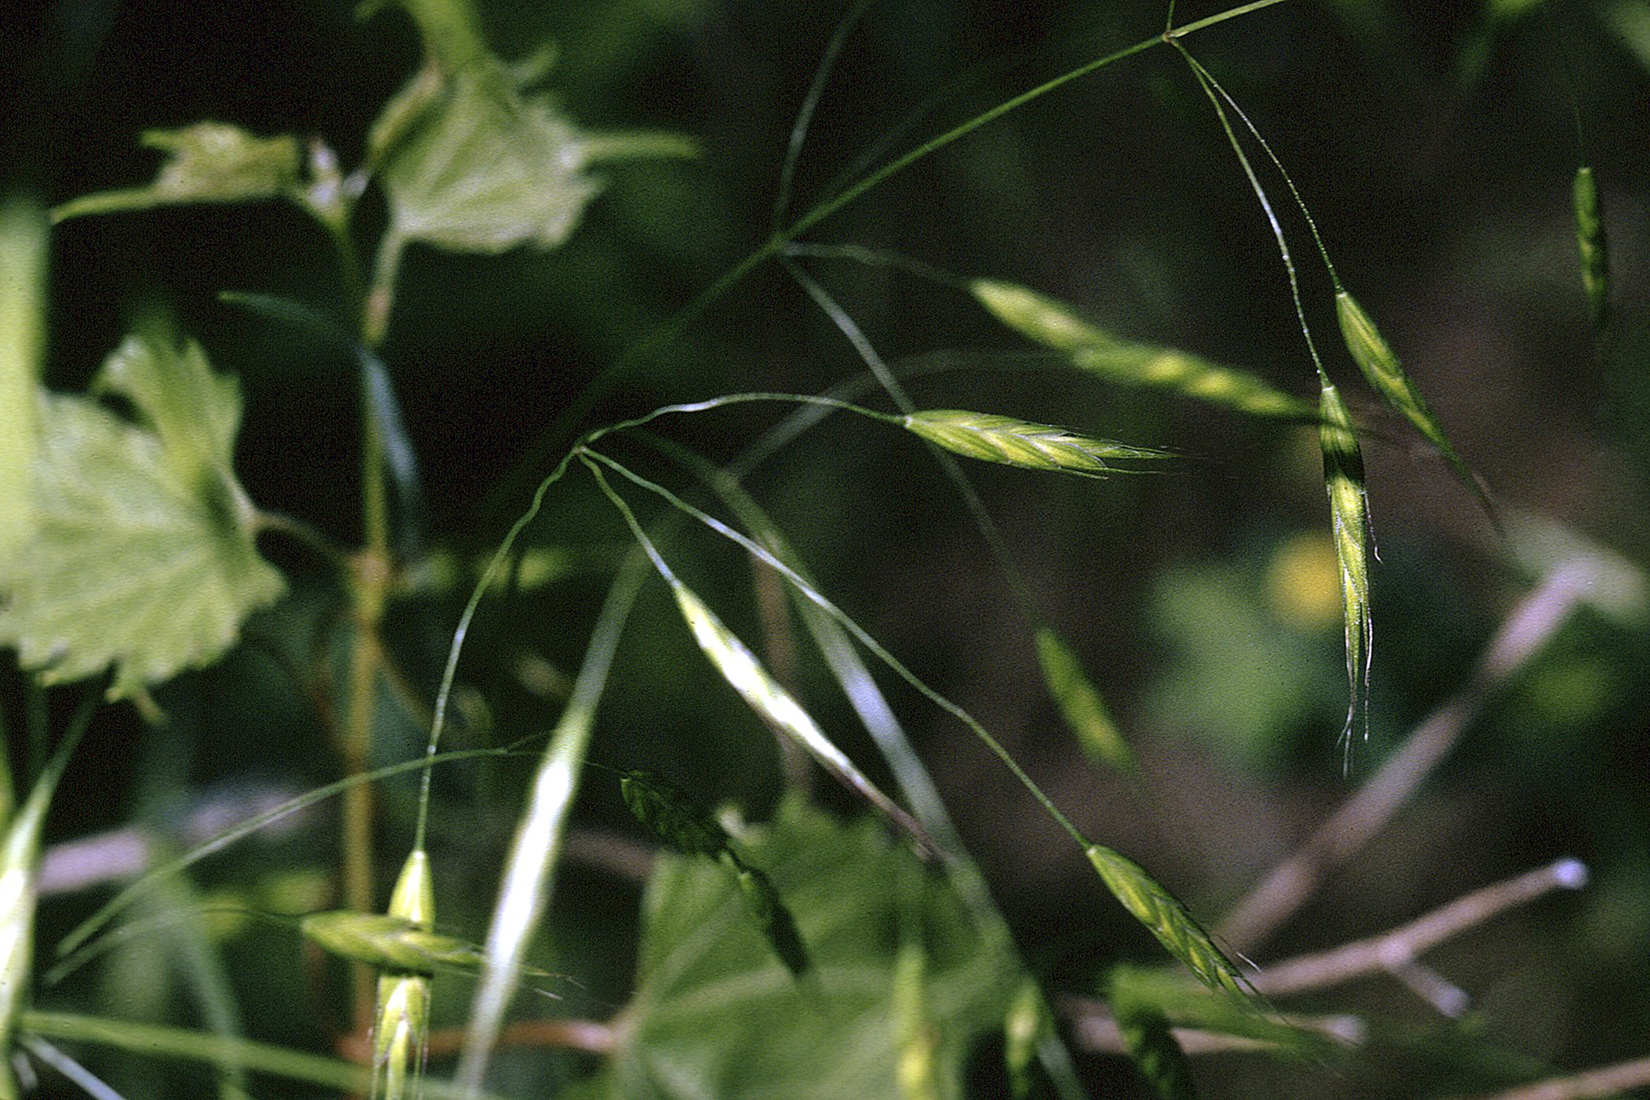 Wispy stems bent by weight of spikelets with seeds